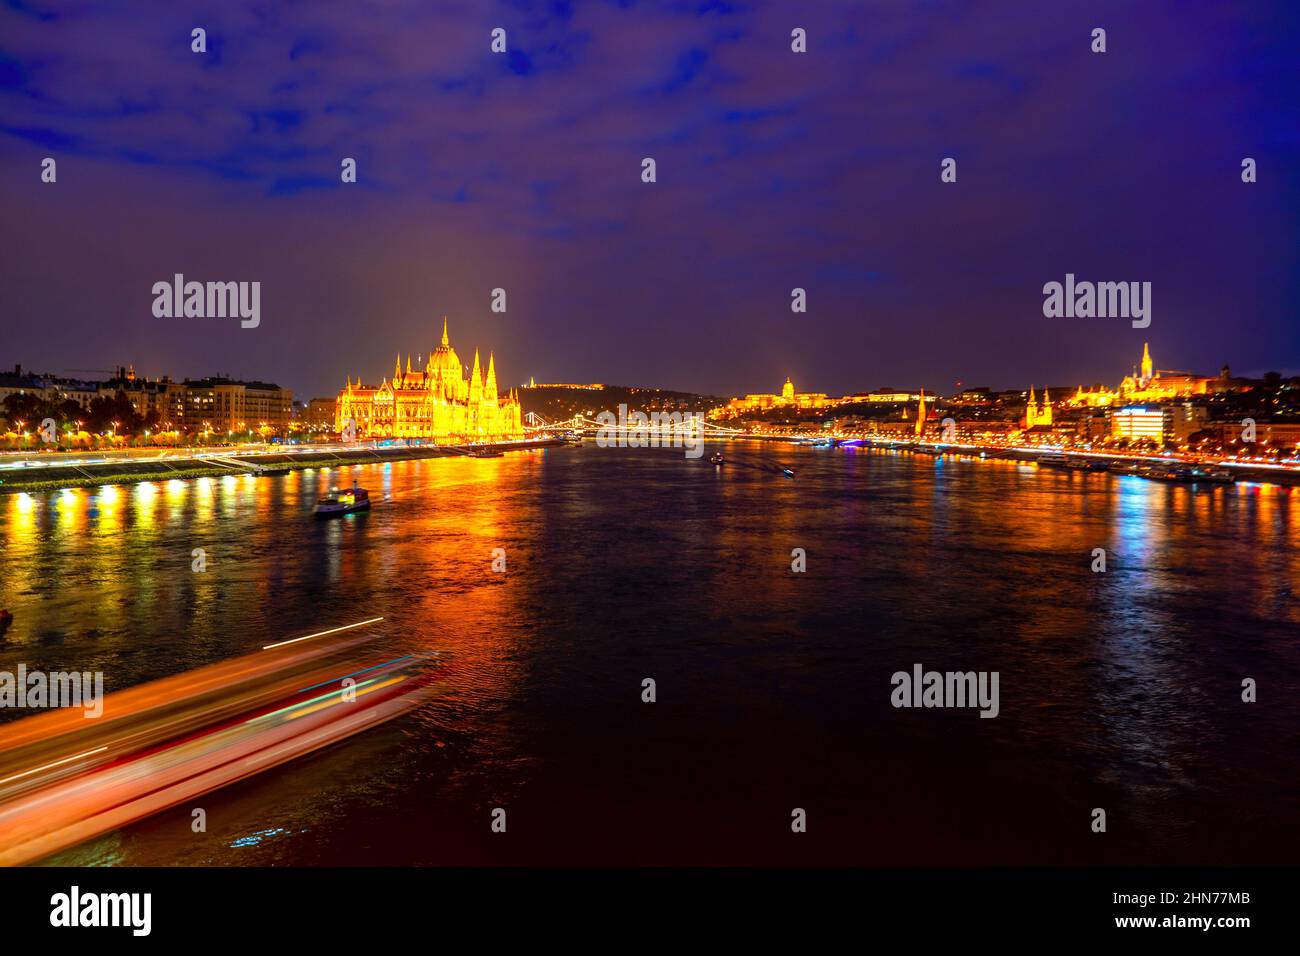 Wonderful mesmerizing view of the city at night illuminated by lights on the danube river. Hungary, budapest. Wonderful architecture at night. Beautif Stock Photo